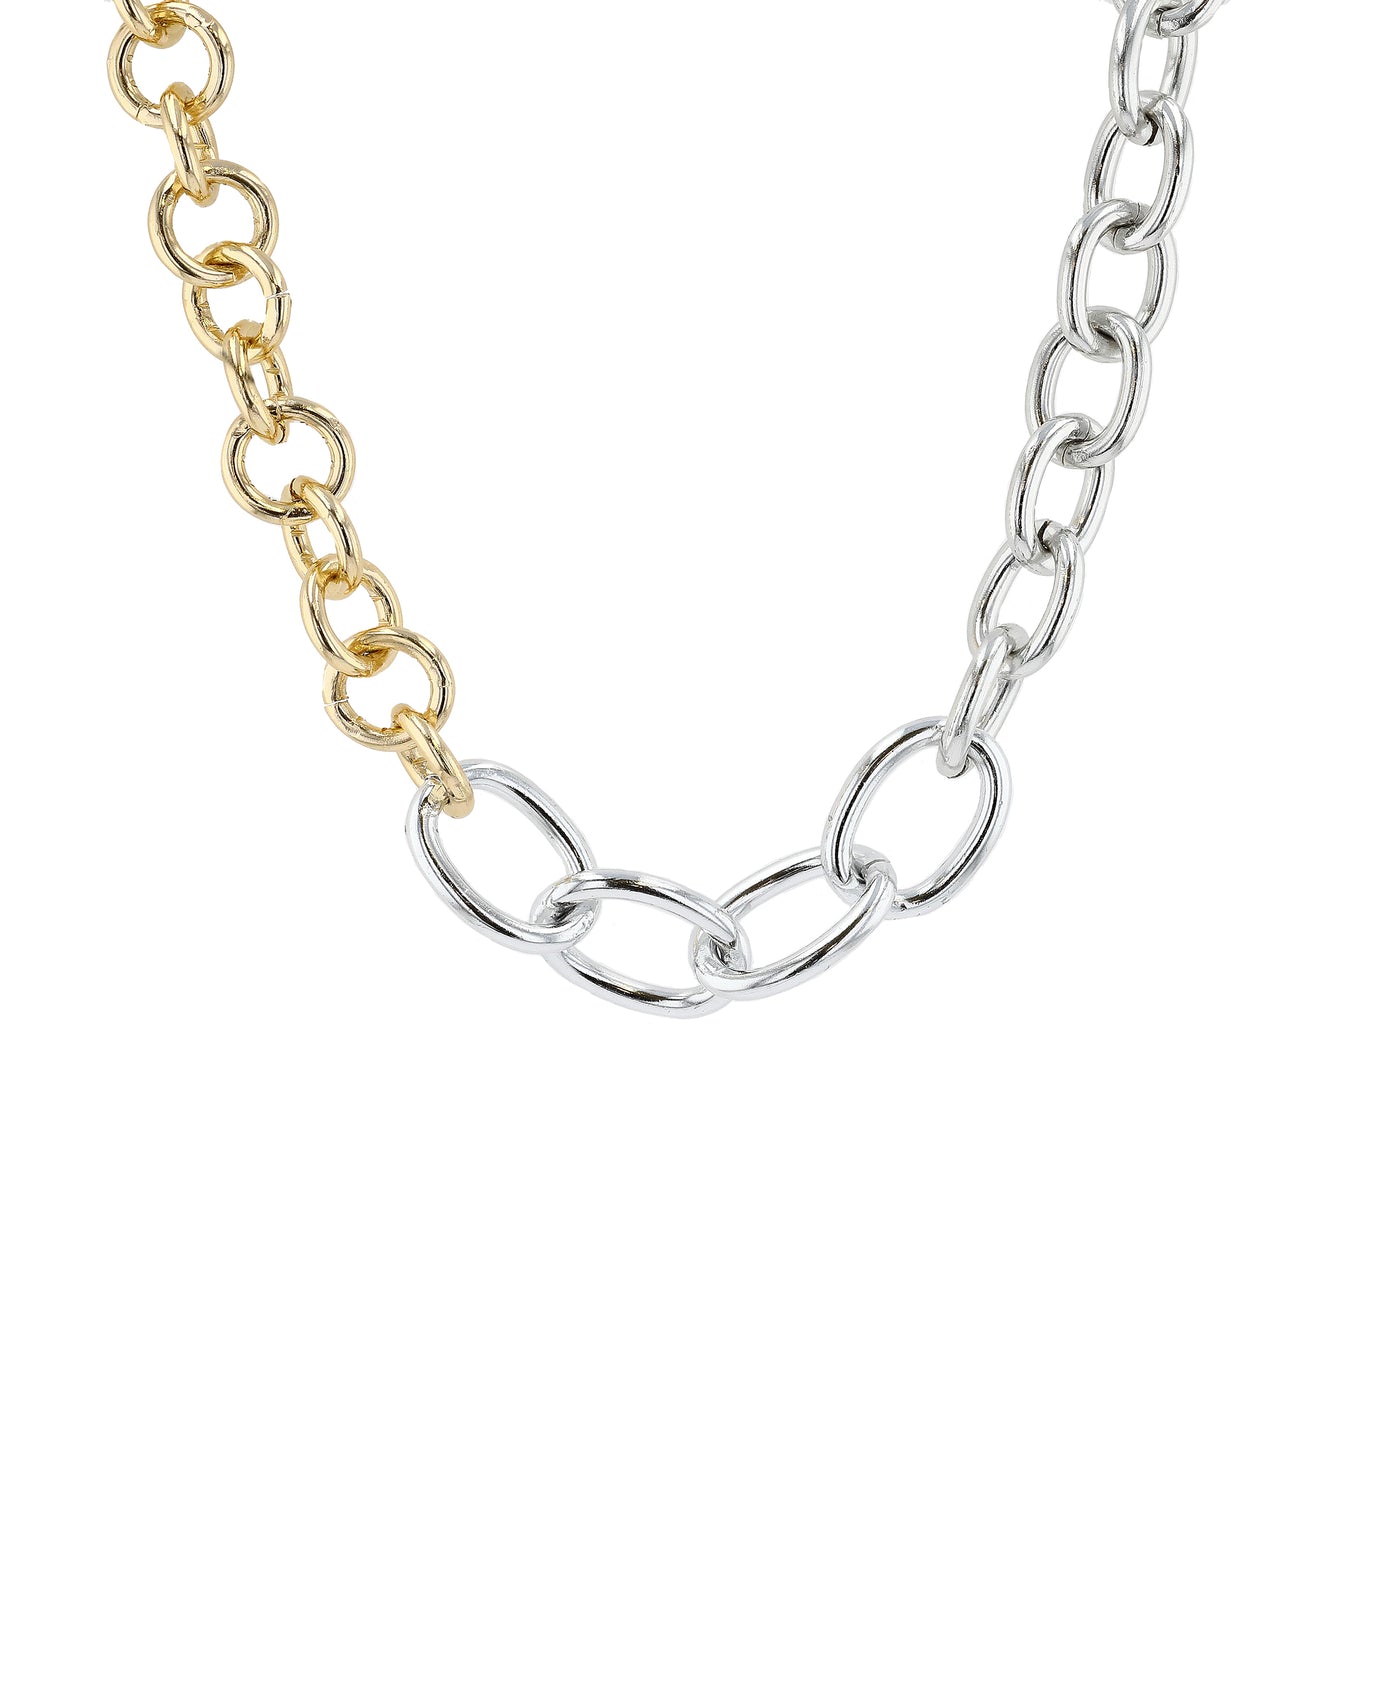 Two- Tone Chain Necklace image 1